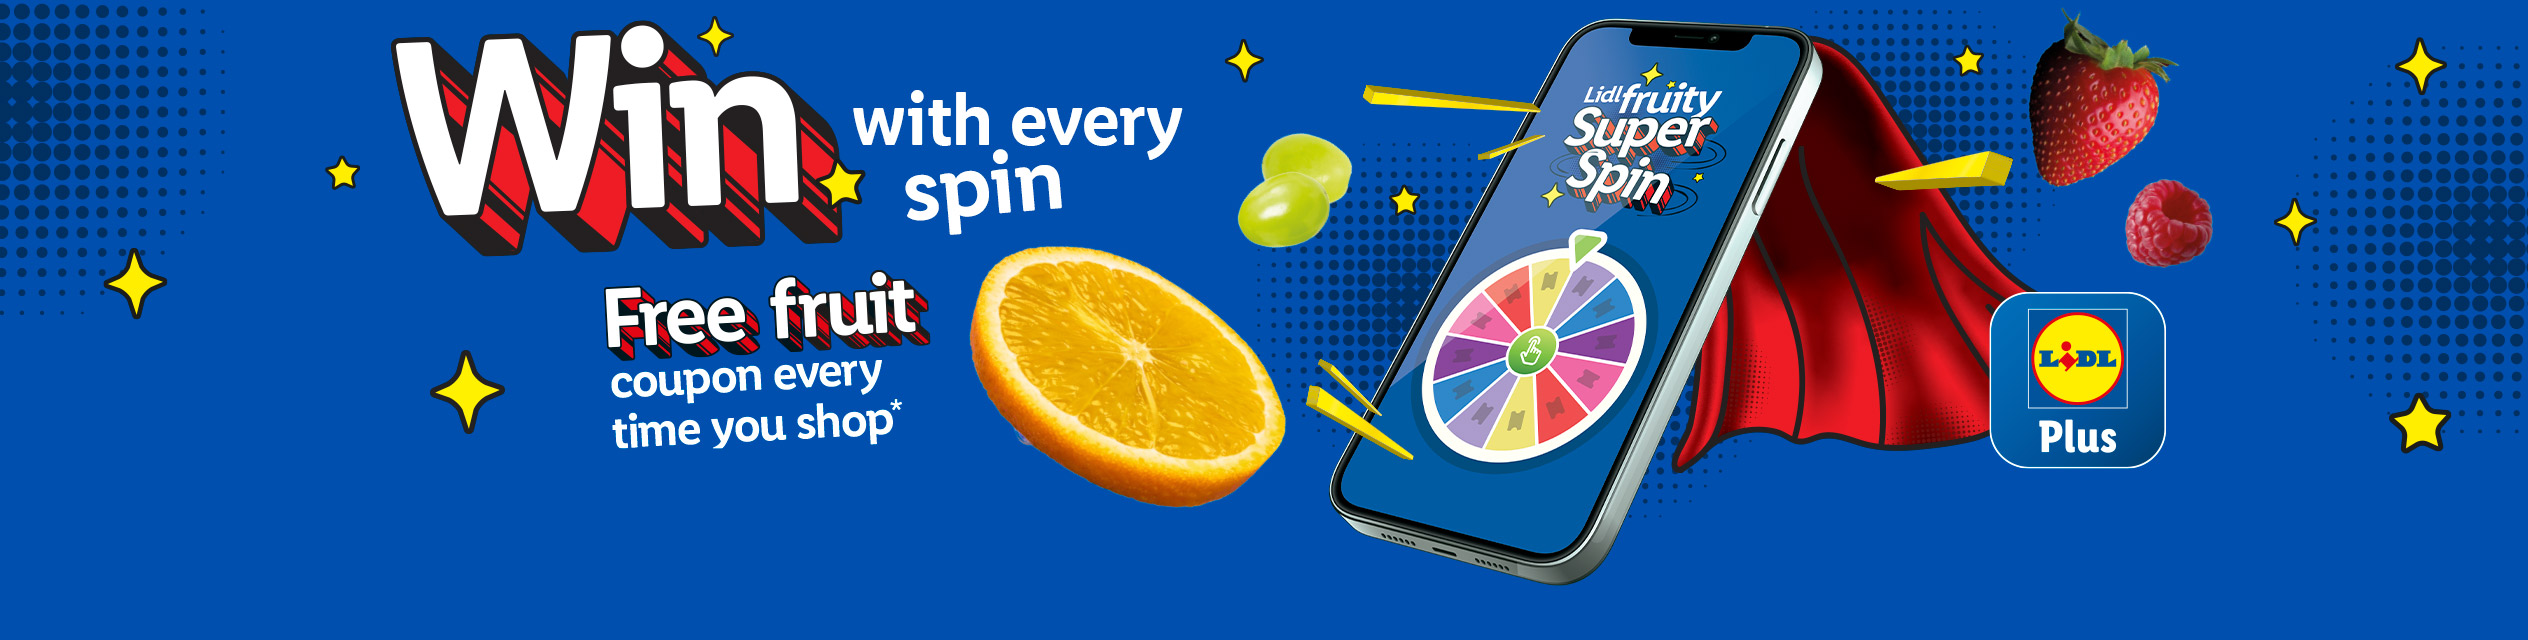 Win free fruit with Lidl Plus